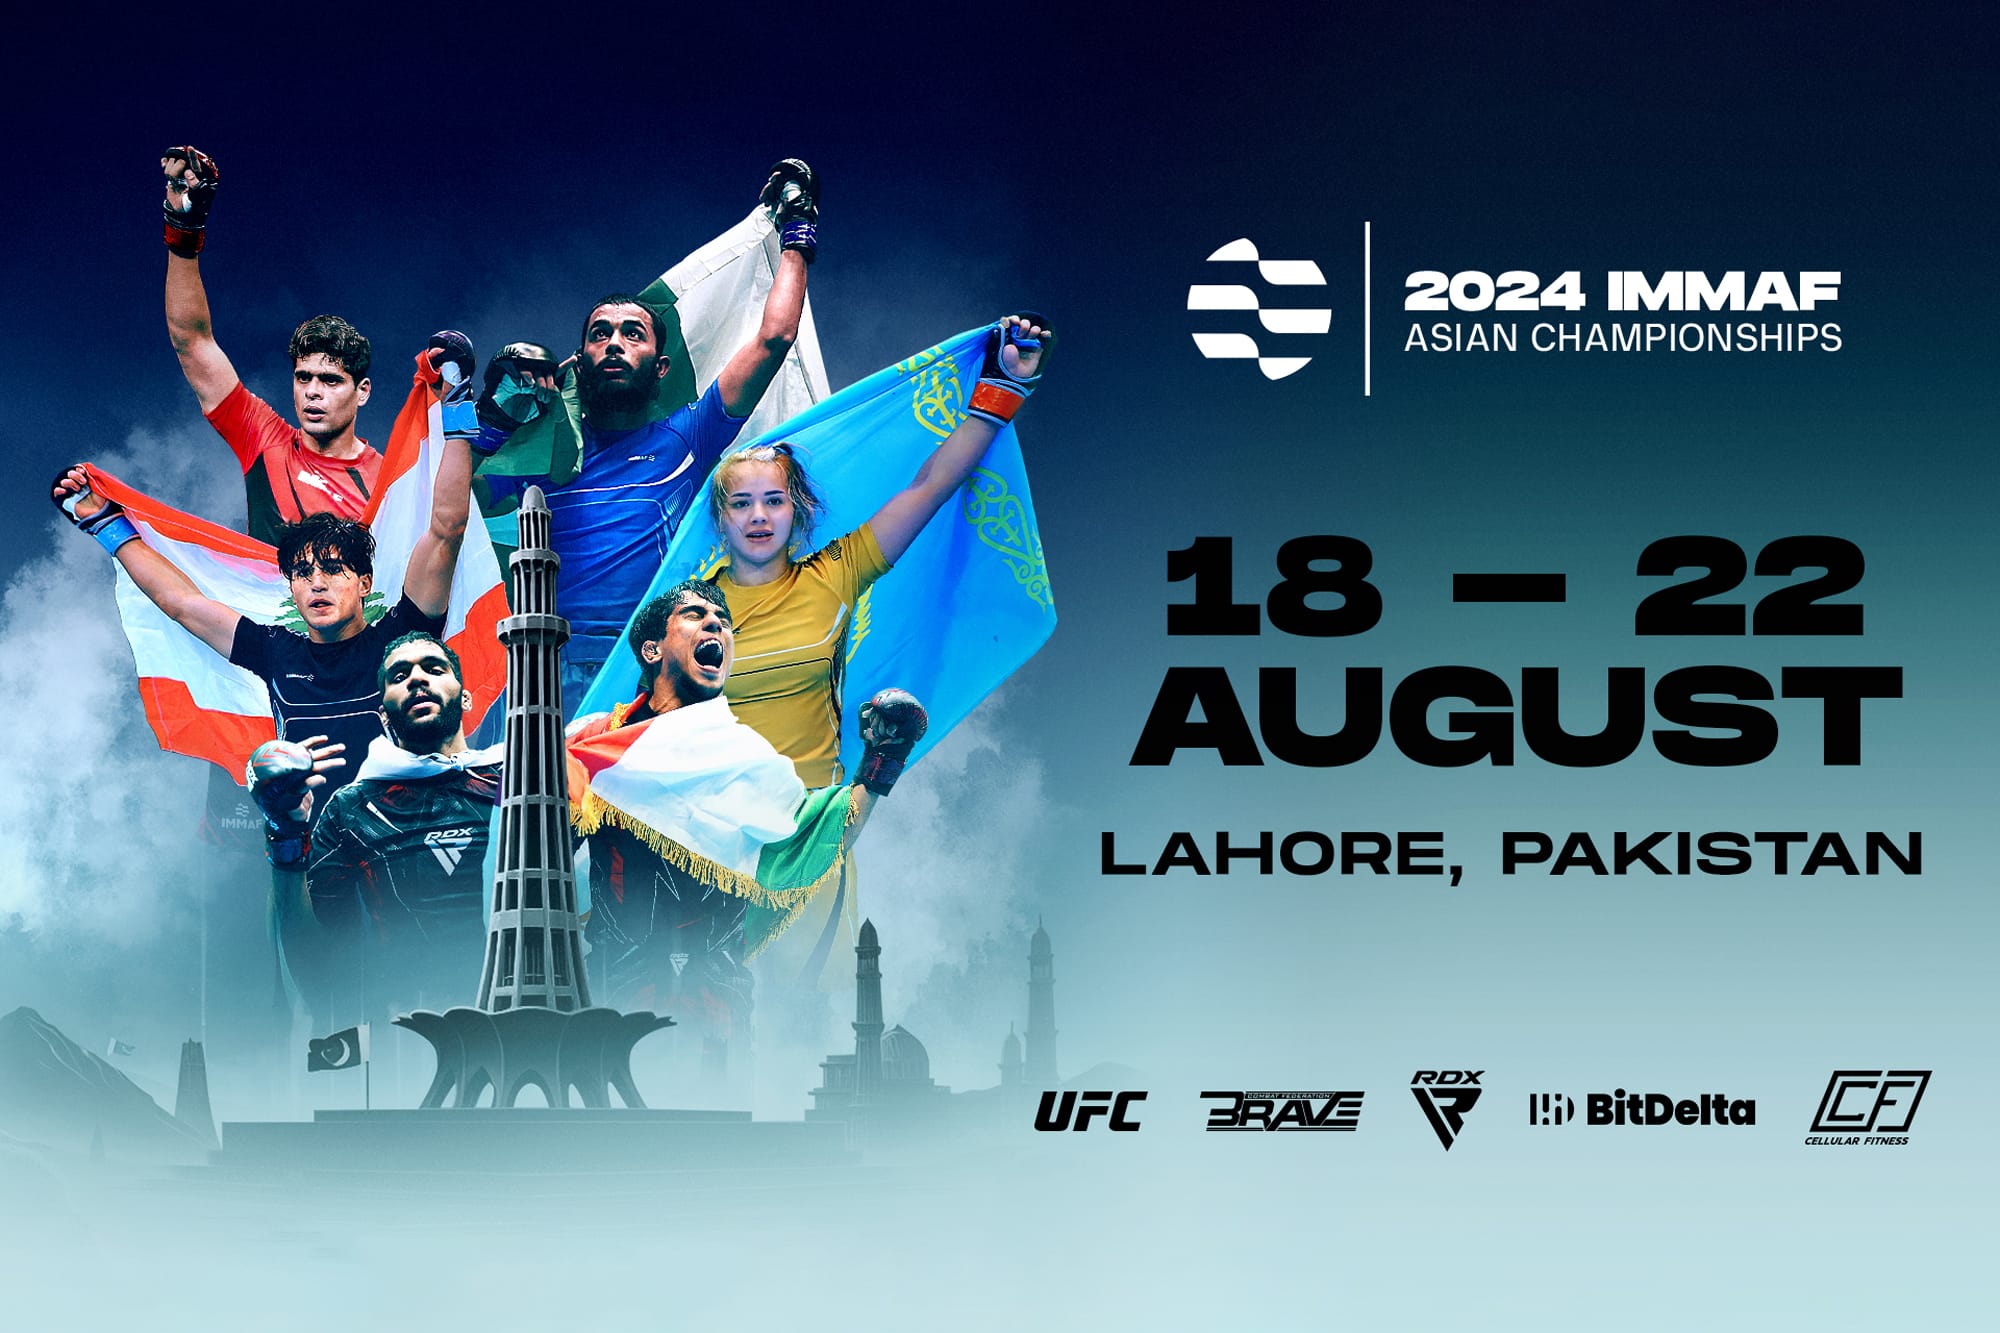 IMMAF Asian Championships moved to August, will take place in Pakistan for the first time